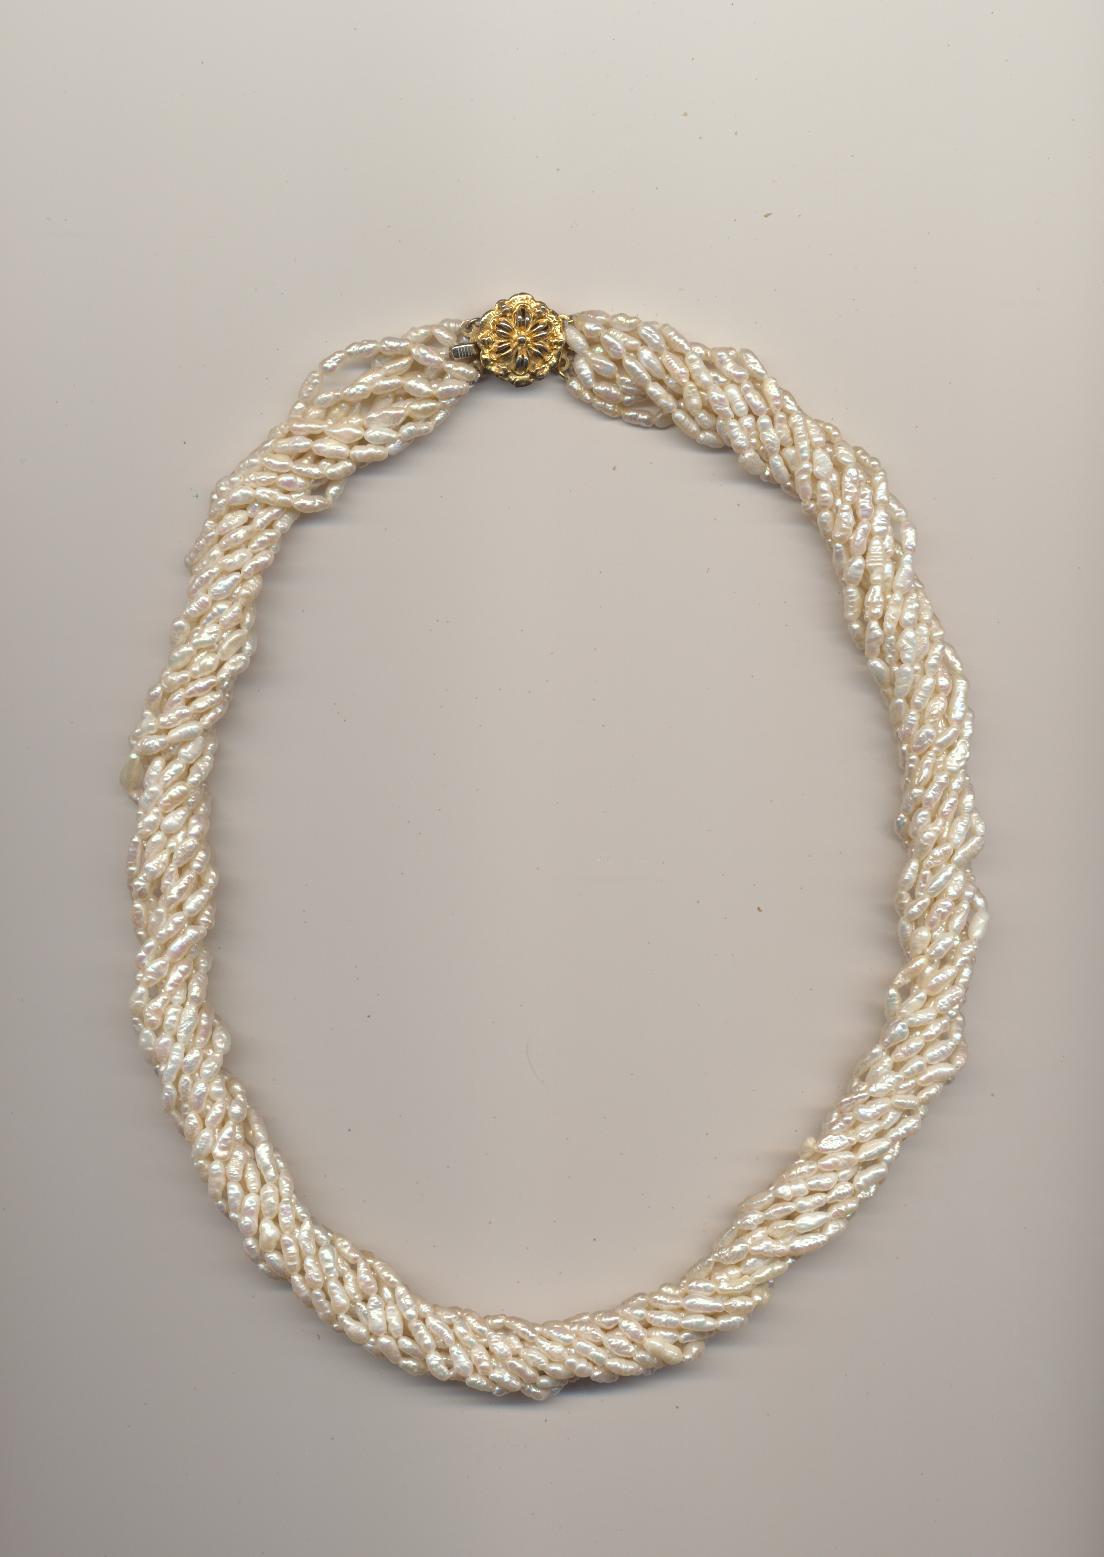 A Twisted Necklace Made Of 10 Strands Freshwater Pearls Of The Same Length